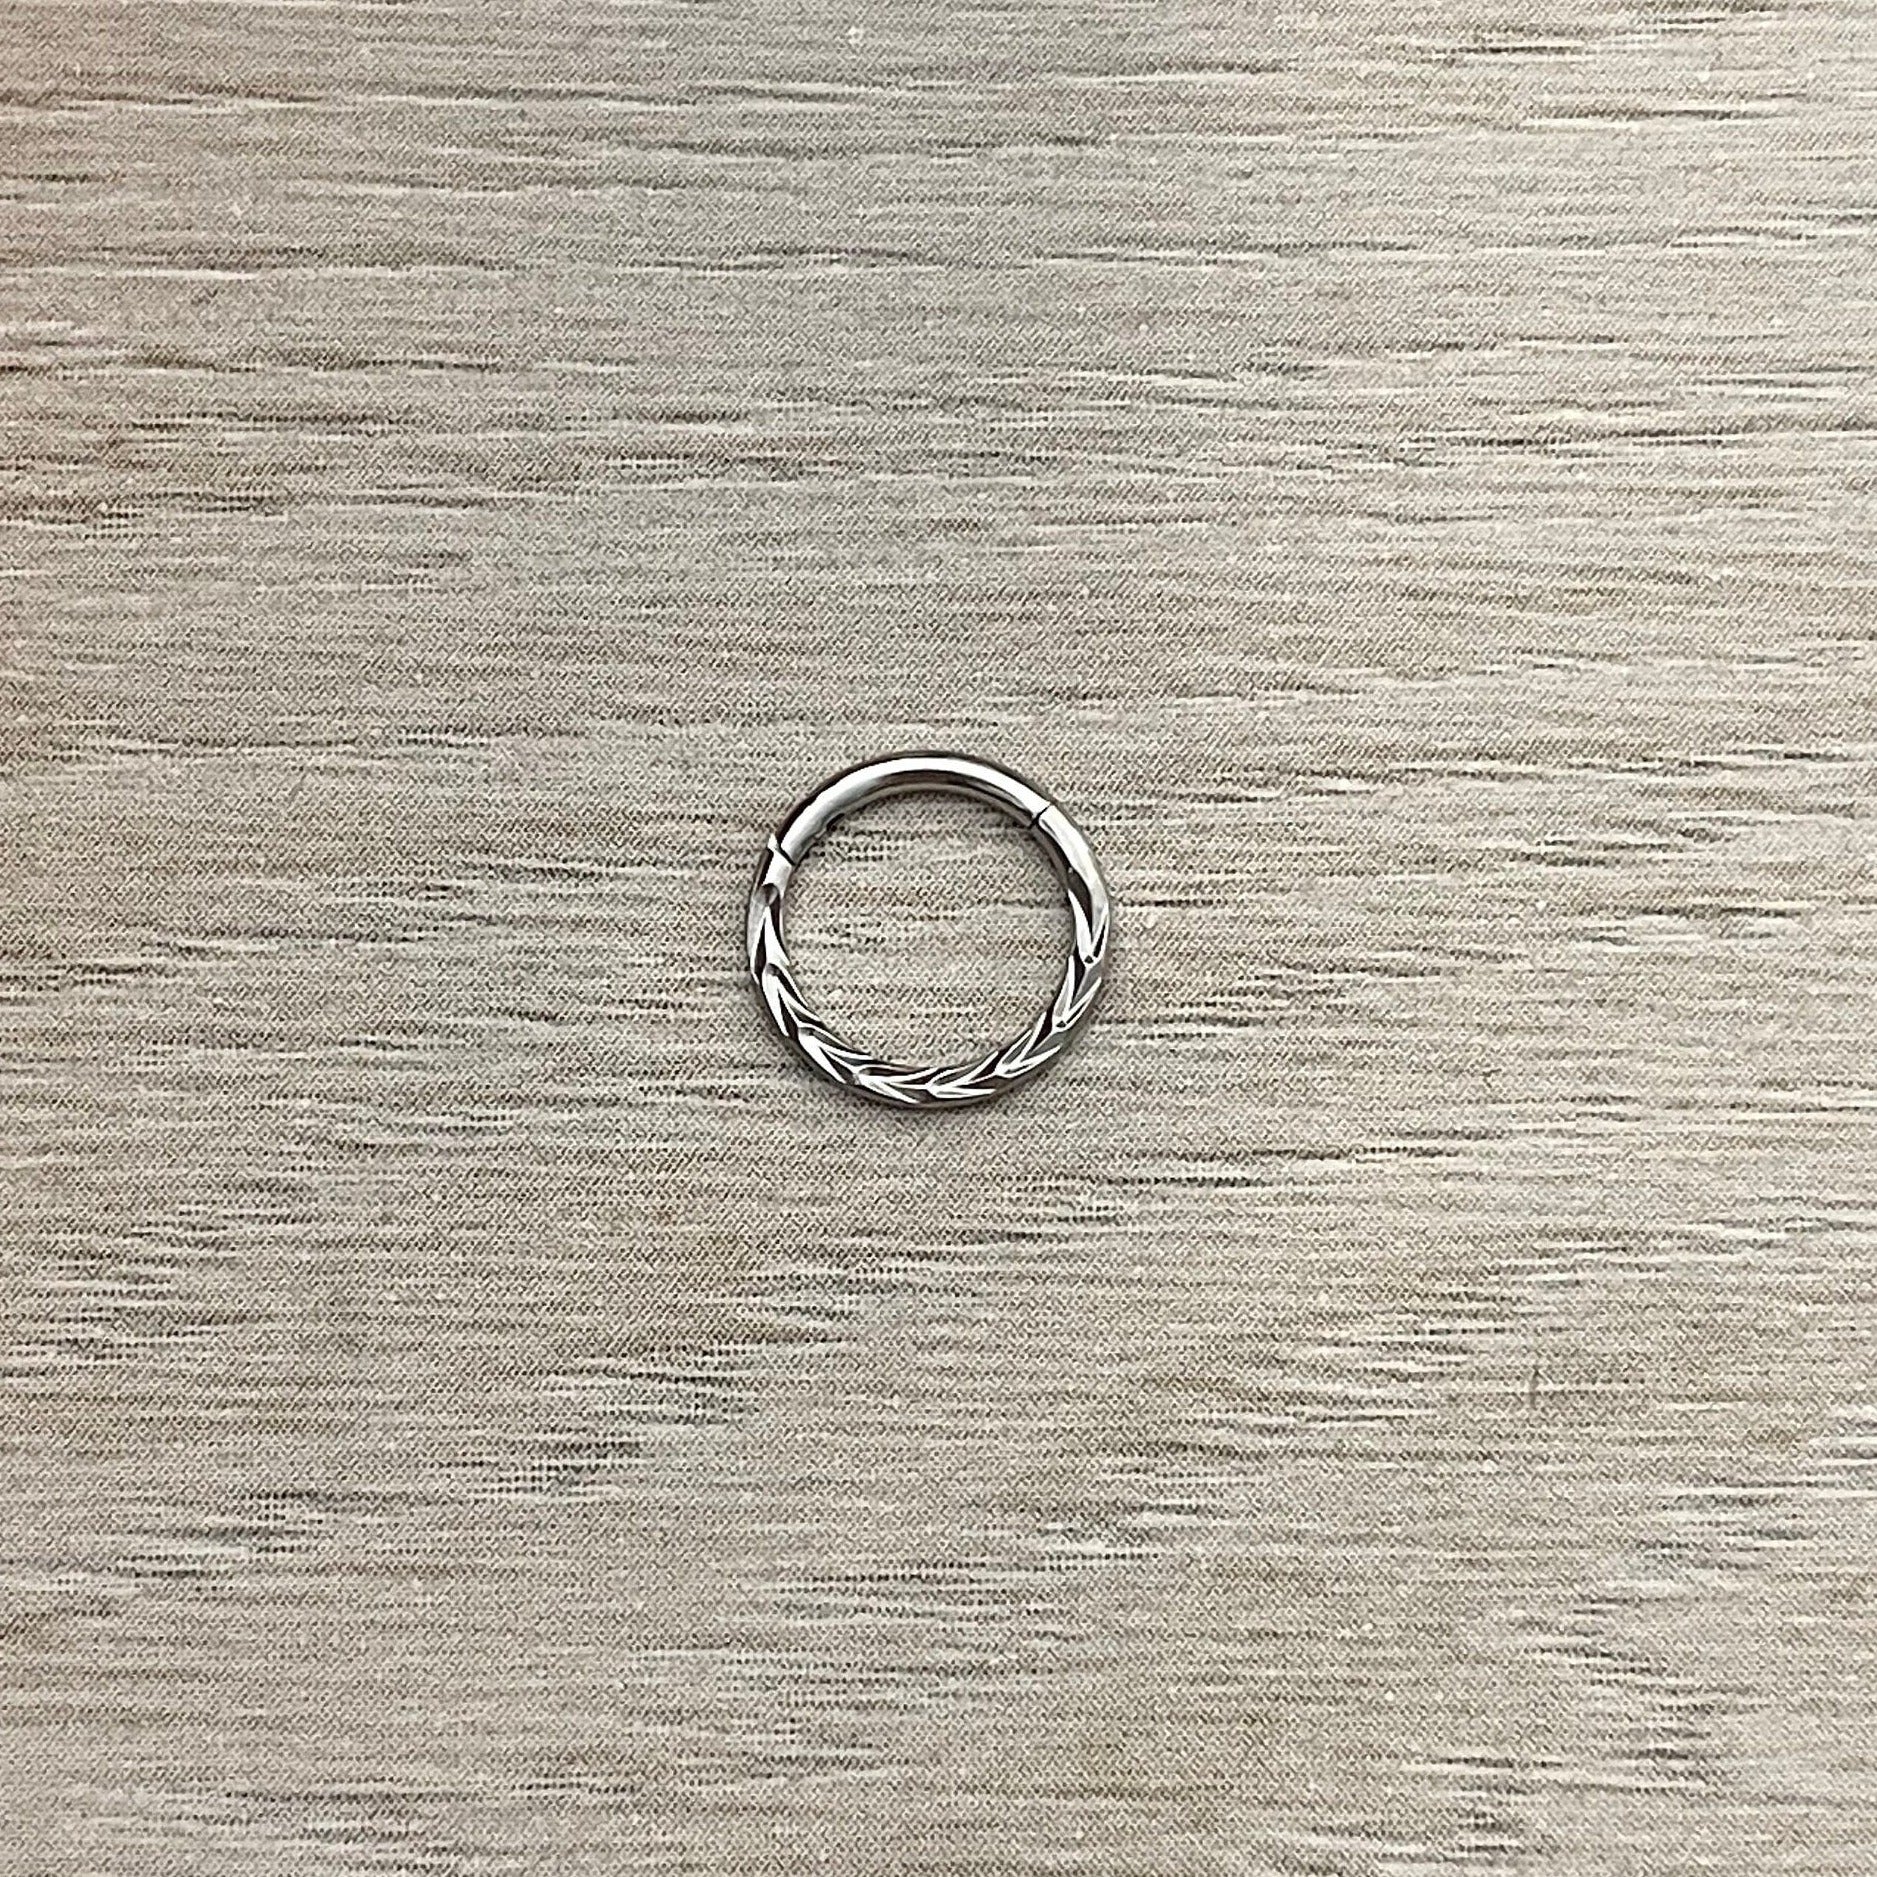 Silver Septum Piercing (16G | 6mm, 8mm or 10mm | Surgical Steel | Gold or Silver)